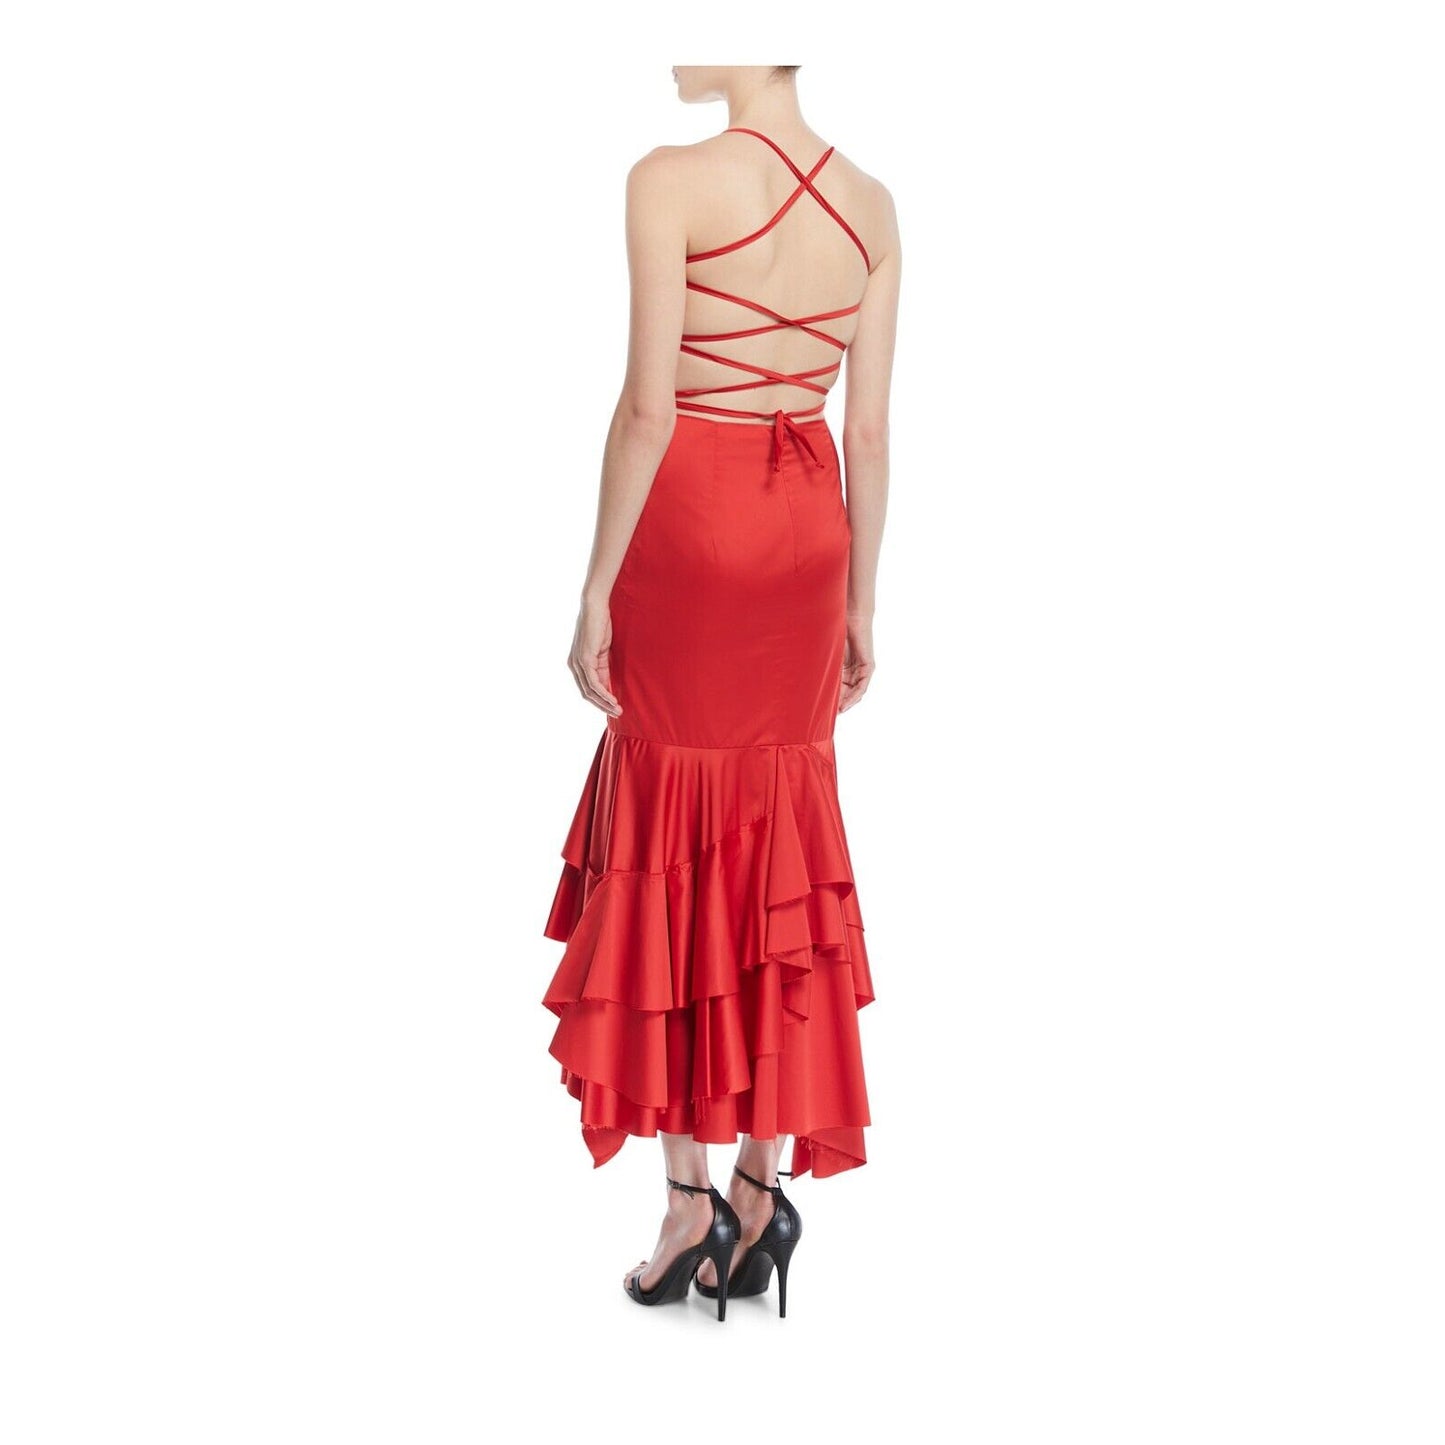 Milly Doria Scarlet Open Back Strappy Flounce Ruffle Apron Dress 8 NWT $650